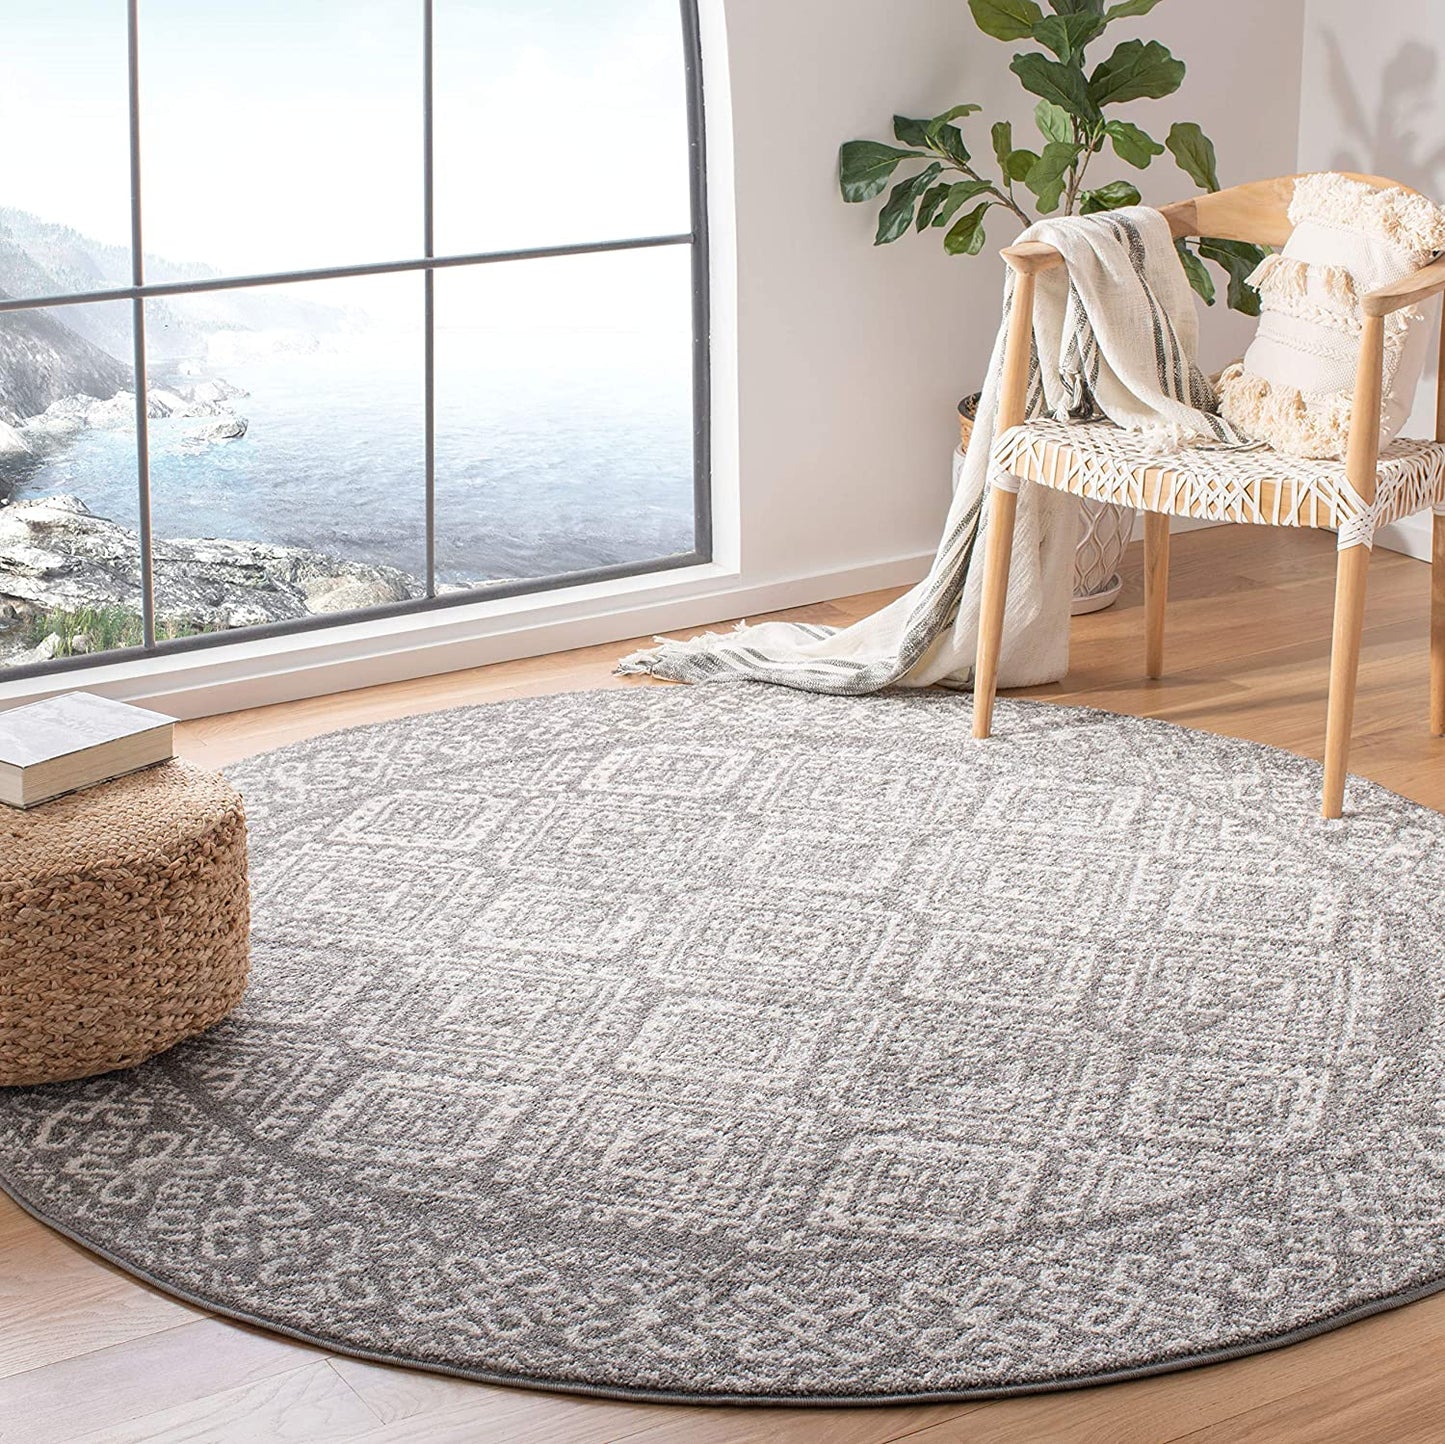 Safavieh Tulum Collection TUL264F Moroccan Boho Distressed Non-Shedding Stain Resistant Living Room Bedroom Area Rug, 6' x 9', Dark Grey / Ivory